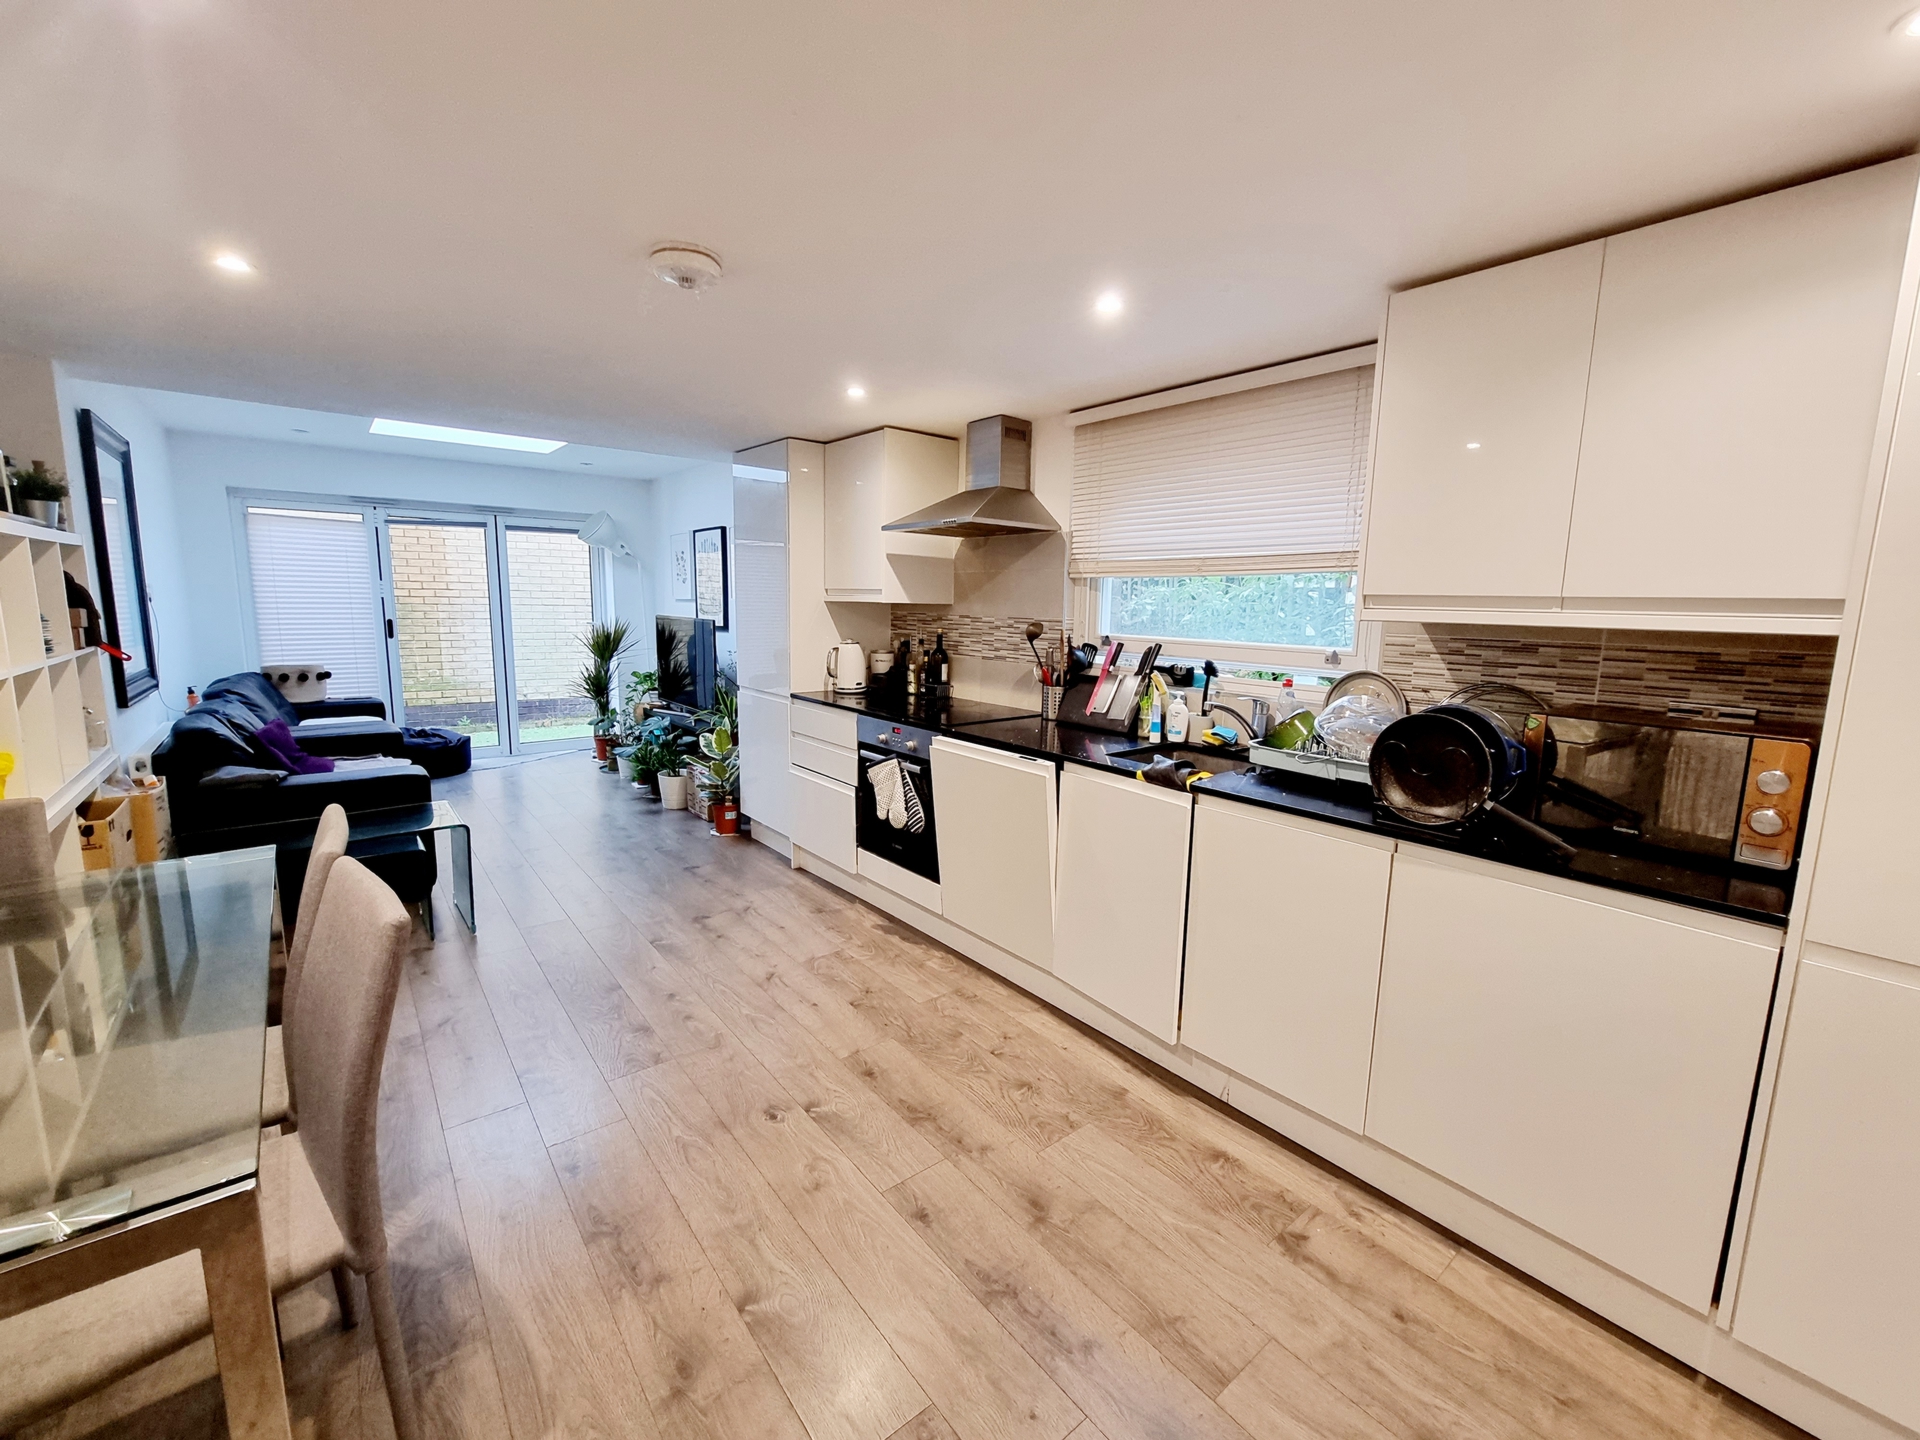 3 Bedroom Flat to rent in West Hampstead, London, NW6